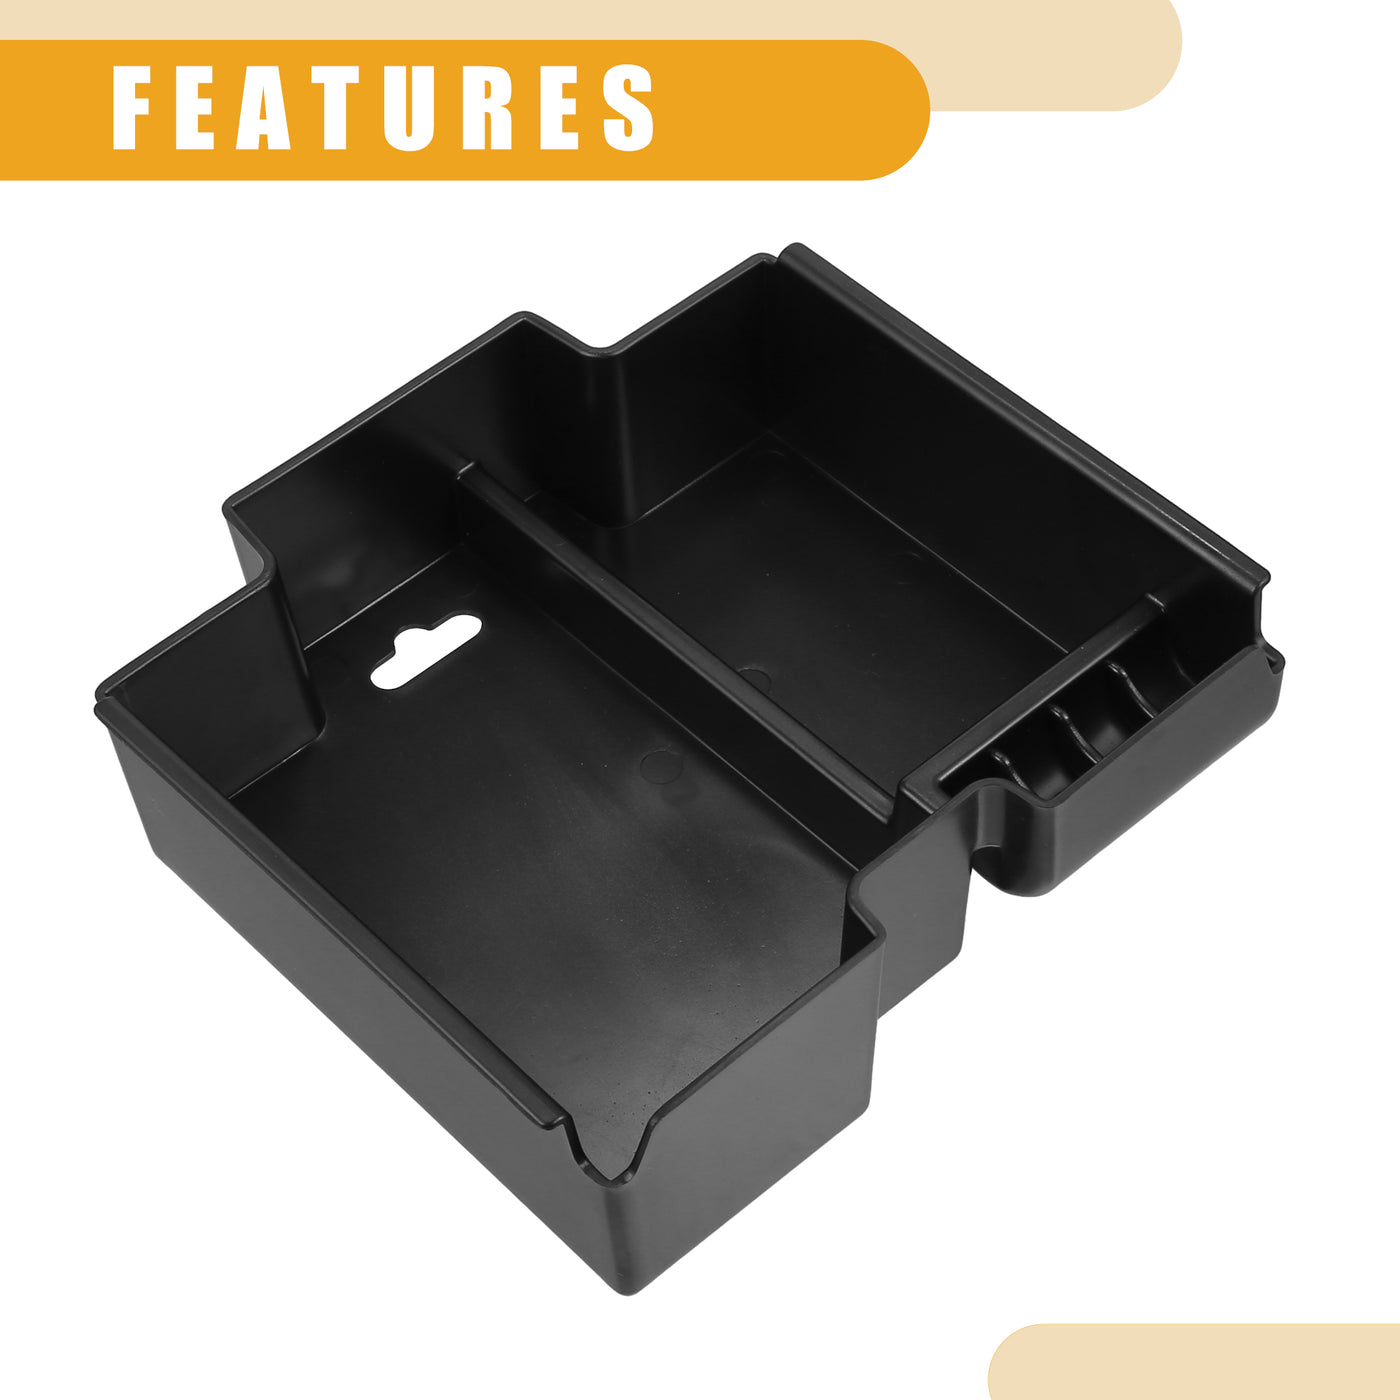 Partuto Center Console Organizer Tray - Car Front Armrest Storage Box - for Land Rover Discovery Sport 2015-2019 Plastic Black - 1 Pc